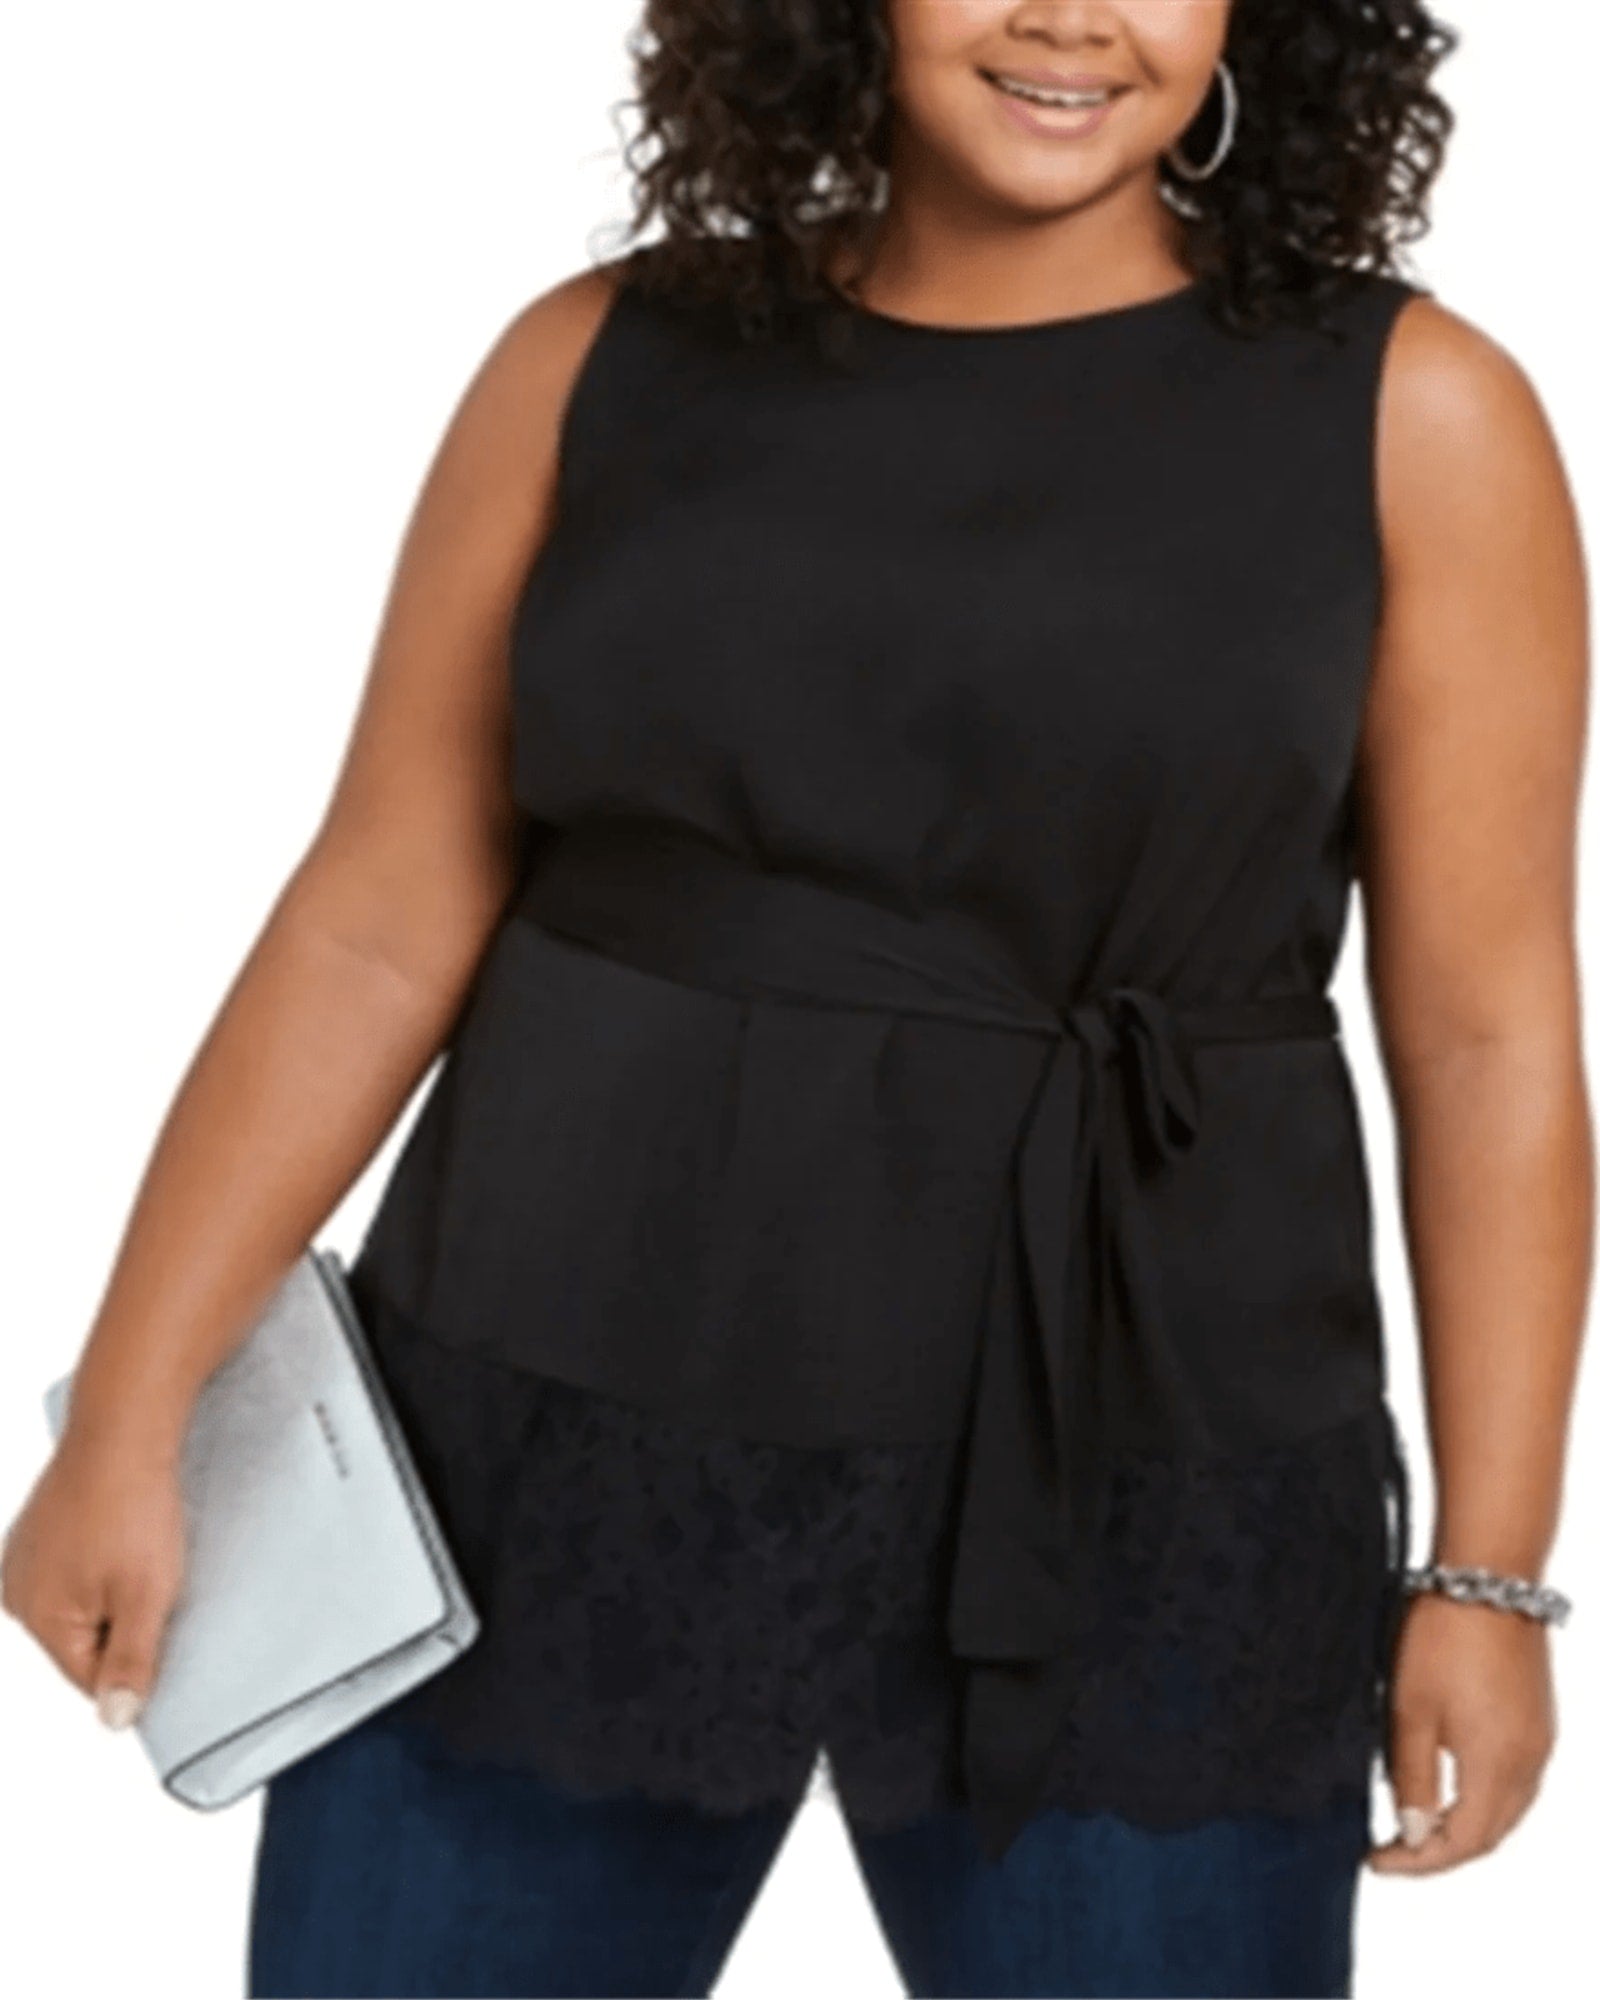 Sexy Plus Size Tops